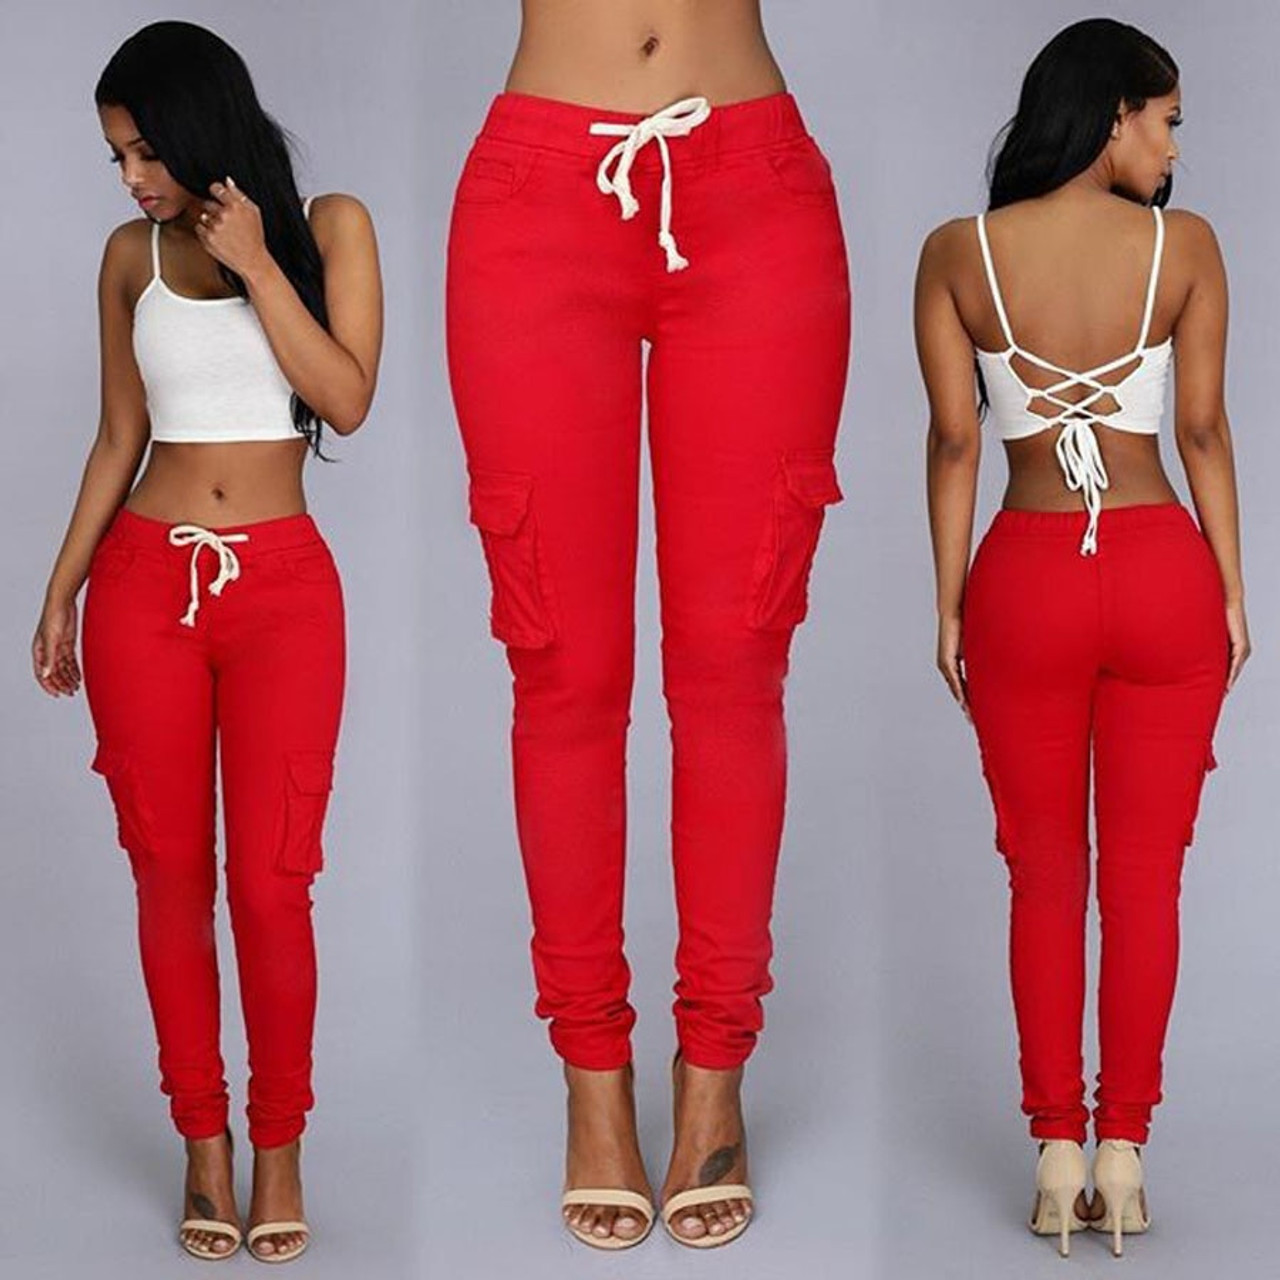 https://cdn11.bigcommerce.com/s-pkla4xn3/images/stencil/1280x1280/products/21135/186764/Elastic-Sexy-Skinny-Pencil-Jeans-For-Women-Leggings-Jeans-Woman-High-Waist-Jeans-Women-s-Thin__32563.1546332628.jpg?c=2?imbypass=on